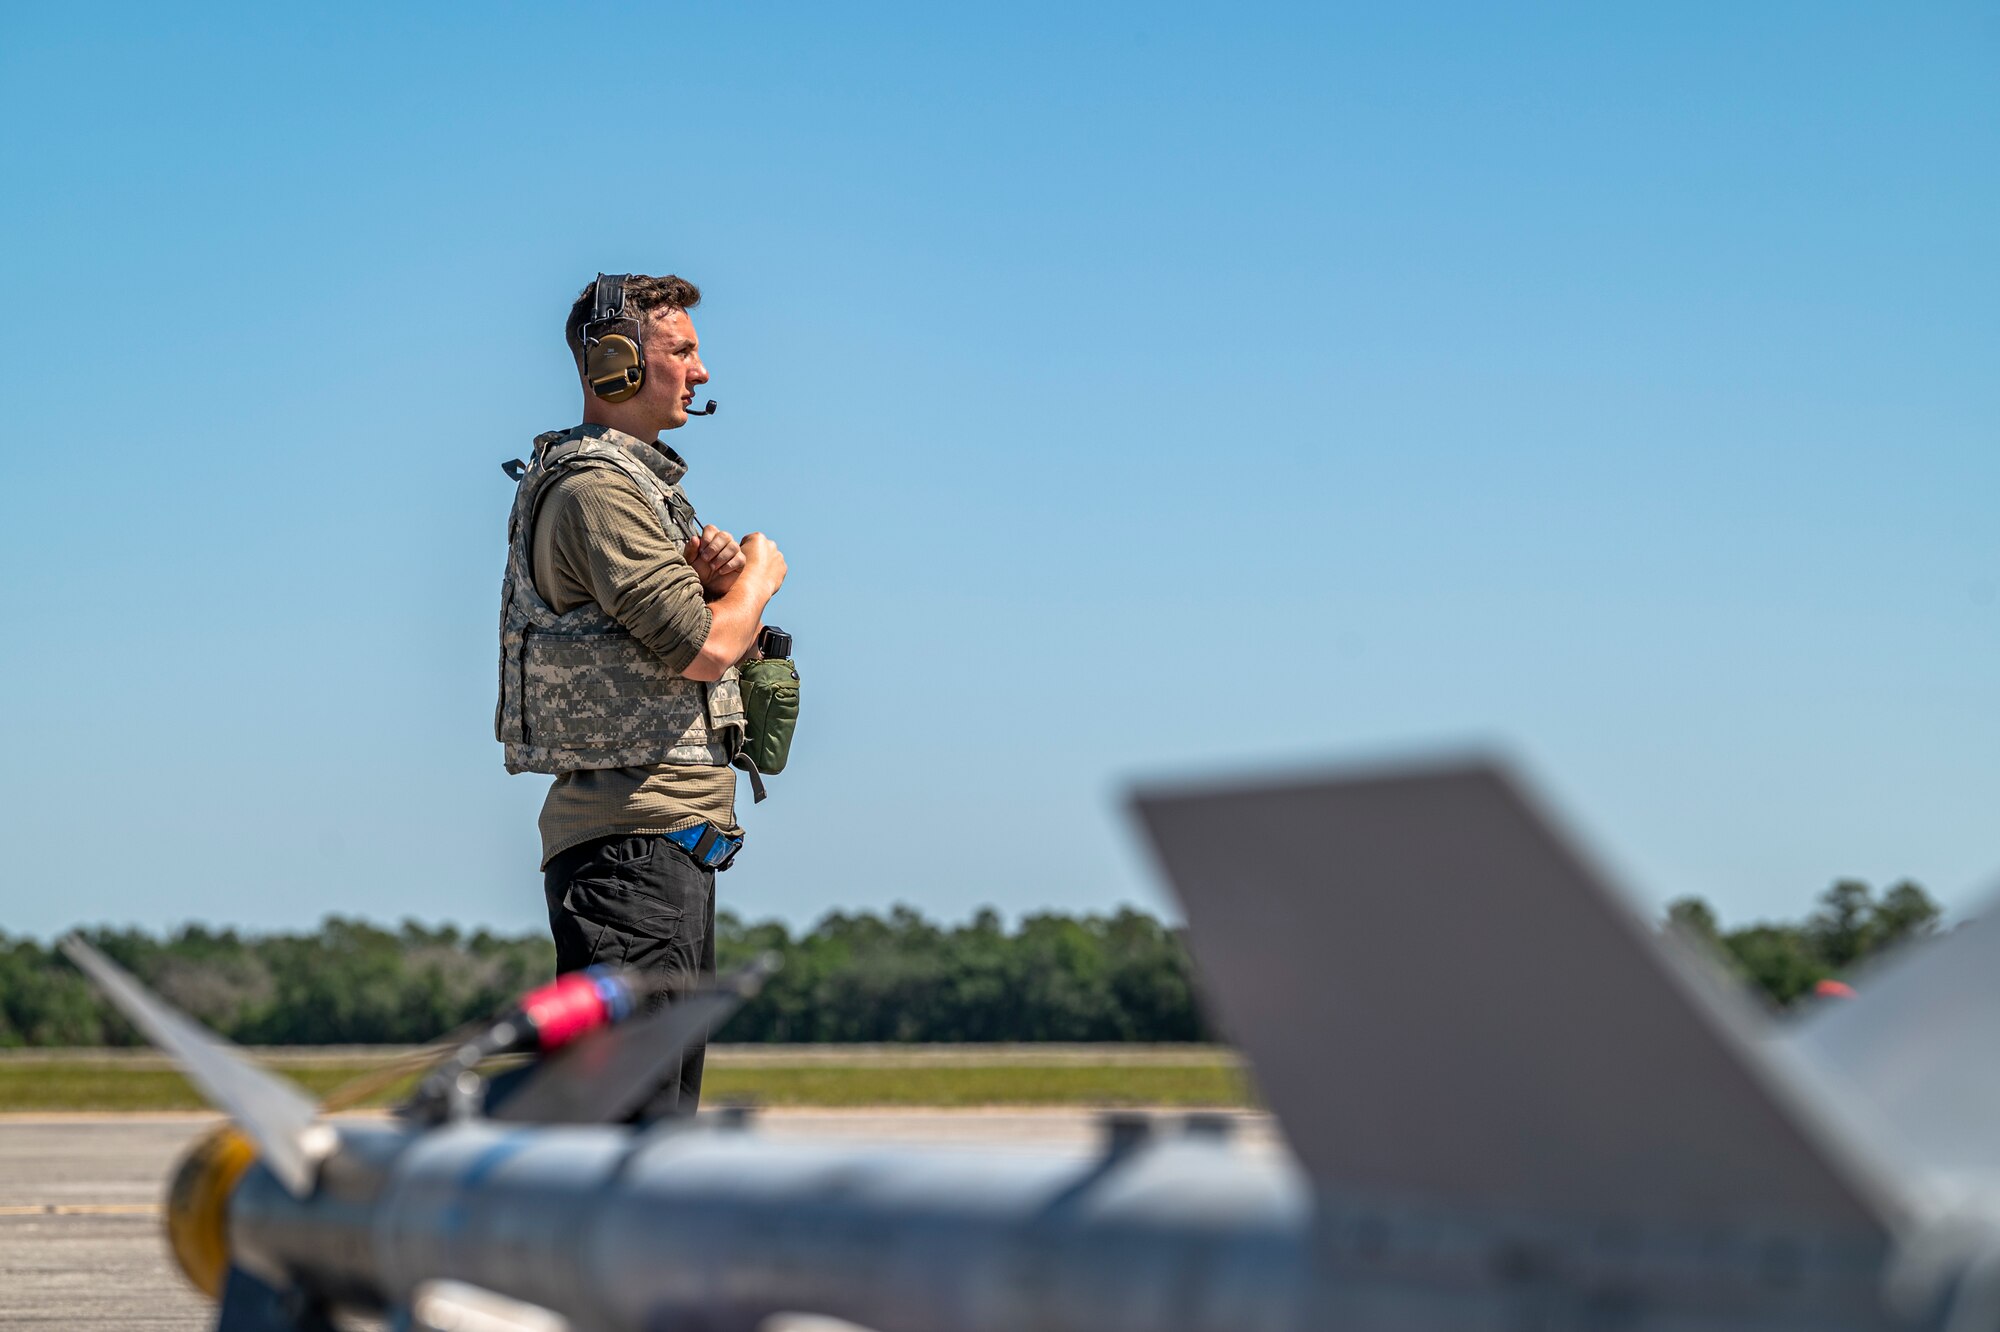 U.S. Air Force Airman 1st Class Conner Holman, 74th Fighter Generation Squadron crew chief, communicates with an A-10C Thunderbolt II pilot during Exercise Ready Tiger 24-1 at Avon Park Air Force Range, Florida, April 12, 2024. Crew chiefs ensure aircrew and their aircraft are ready to execute the mission at a moment’s notice regardless of their location. Ready Tiger 24-1 is a readiness exercise demonstrating the 23rd Wing’s ability to plan, prepare and execute operations and maintenance to project air power in contested and dispersed locations, defending the United States’ interests and allies. (U.S. Air Force photo by Airman 1st Class Leonid Soubbotine)